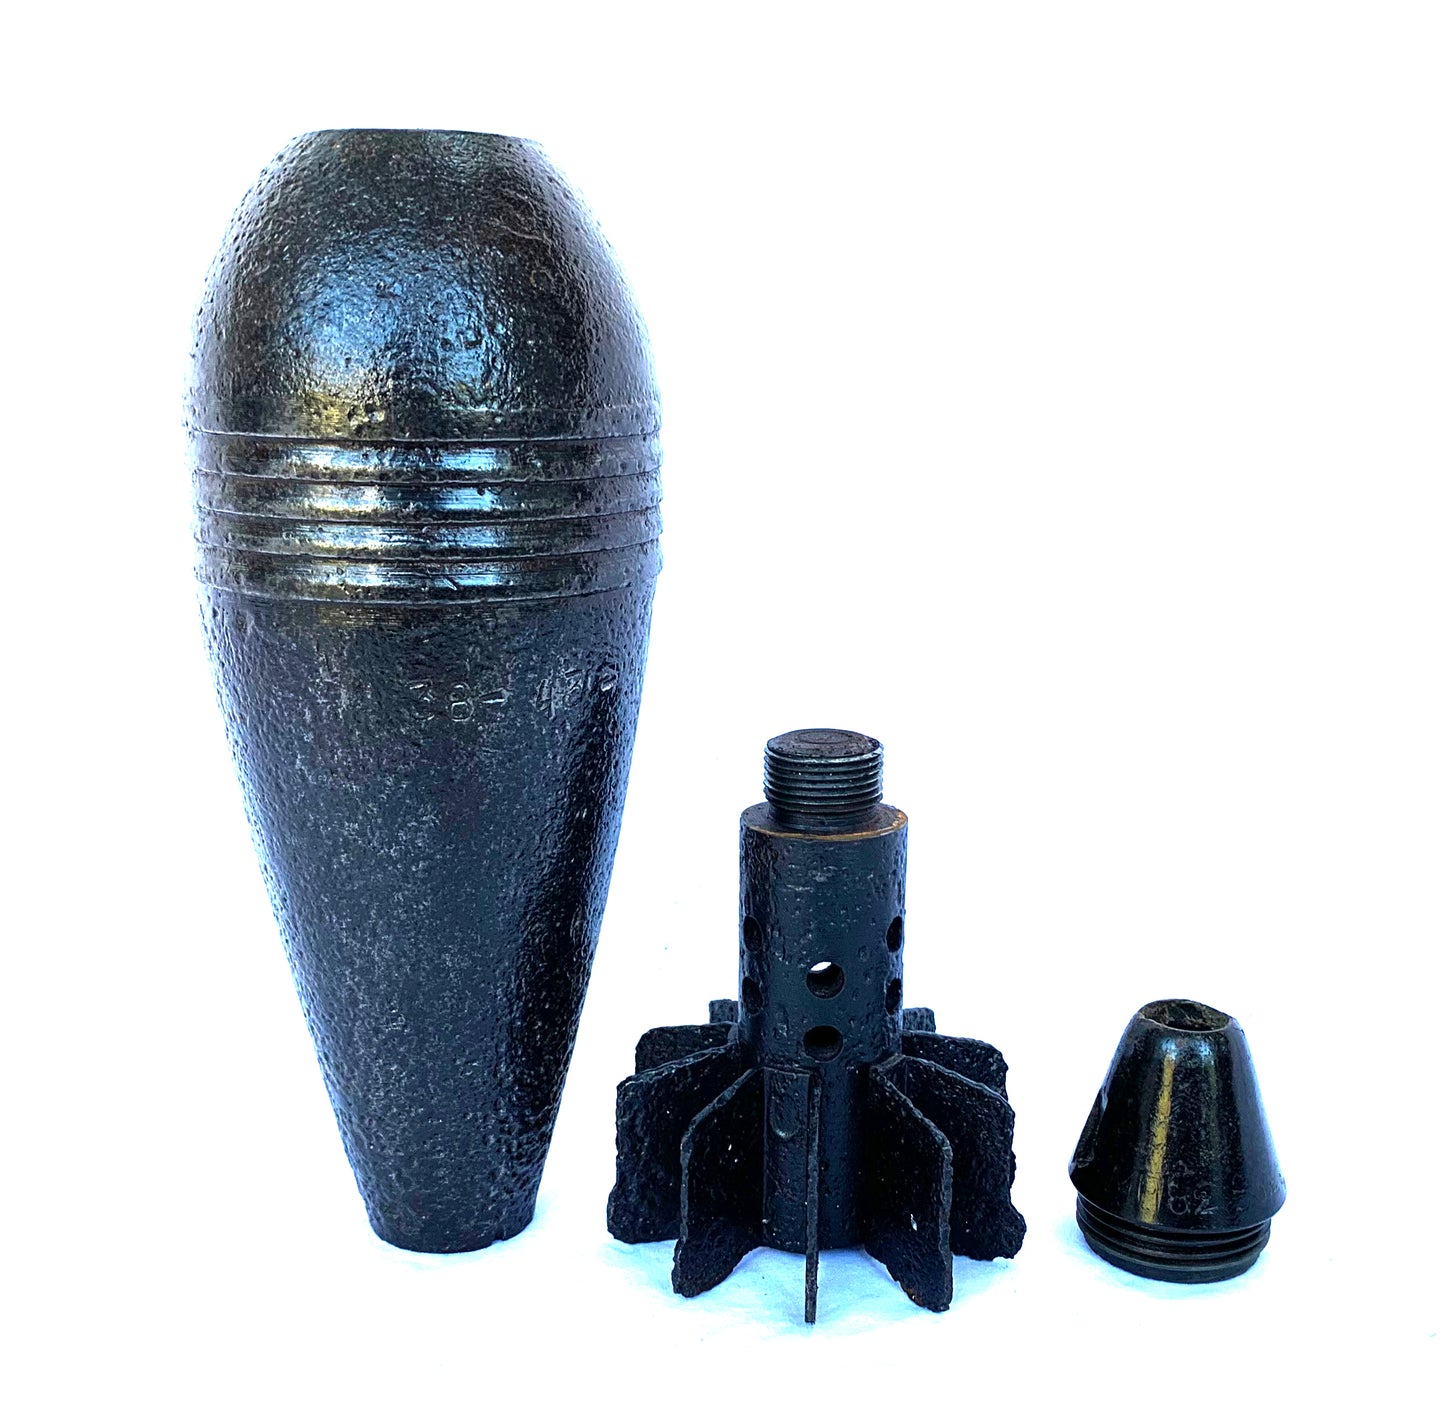 WW2 Russian 8cm Mortar Round for the 82mm Mortar Model 1941